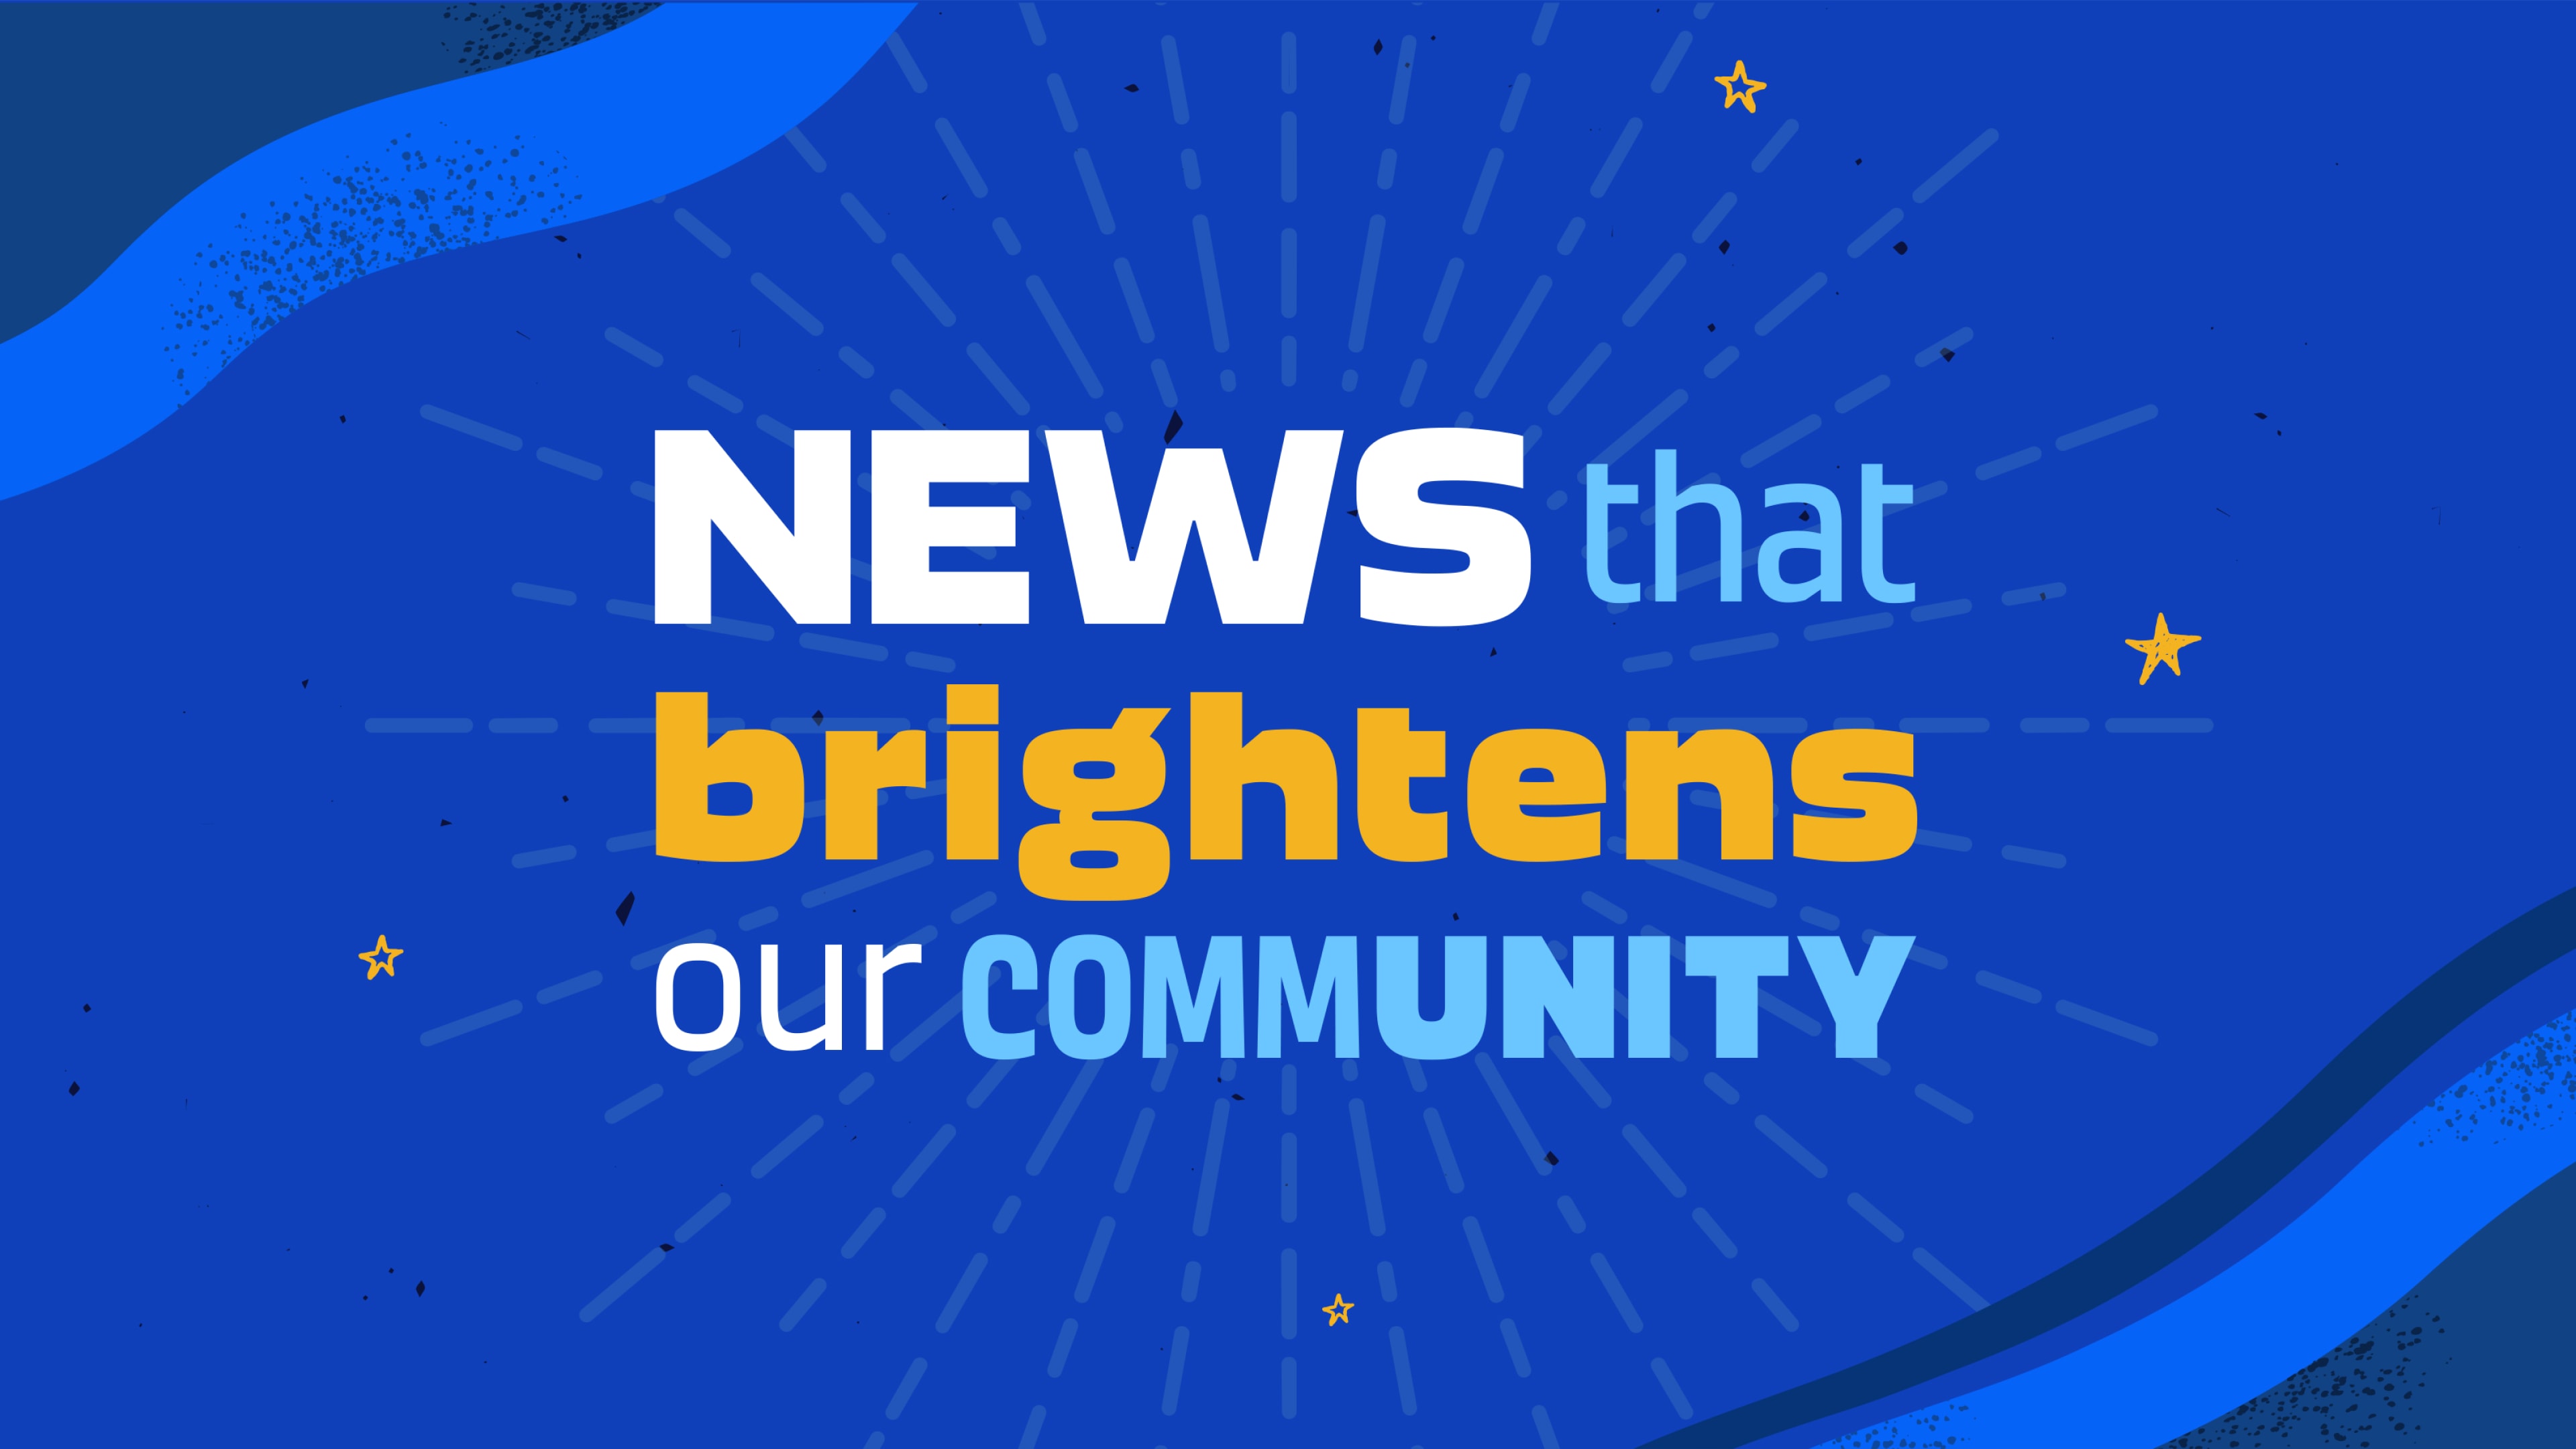 News that brightens the community